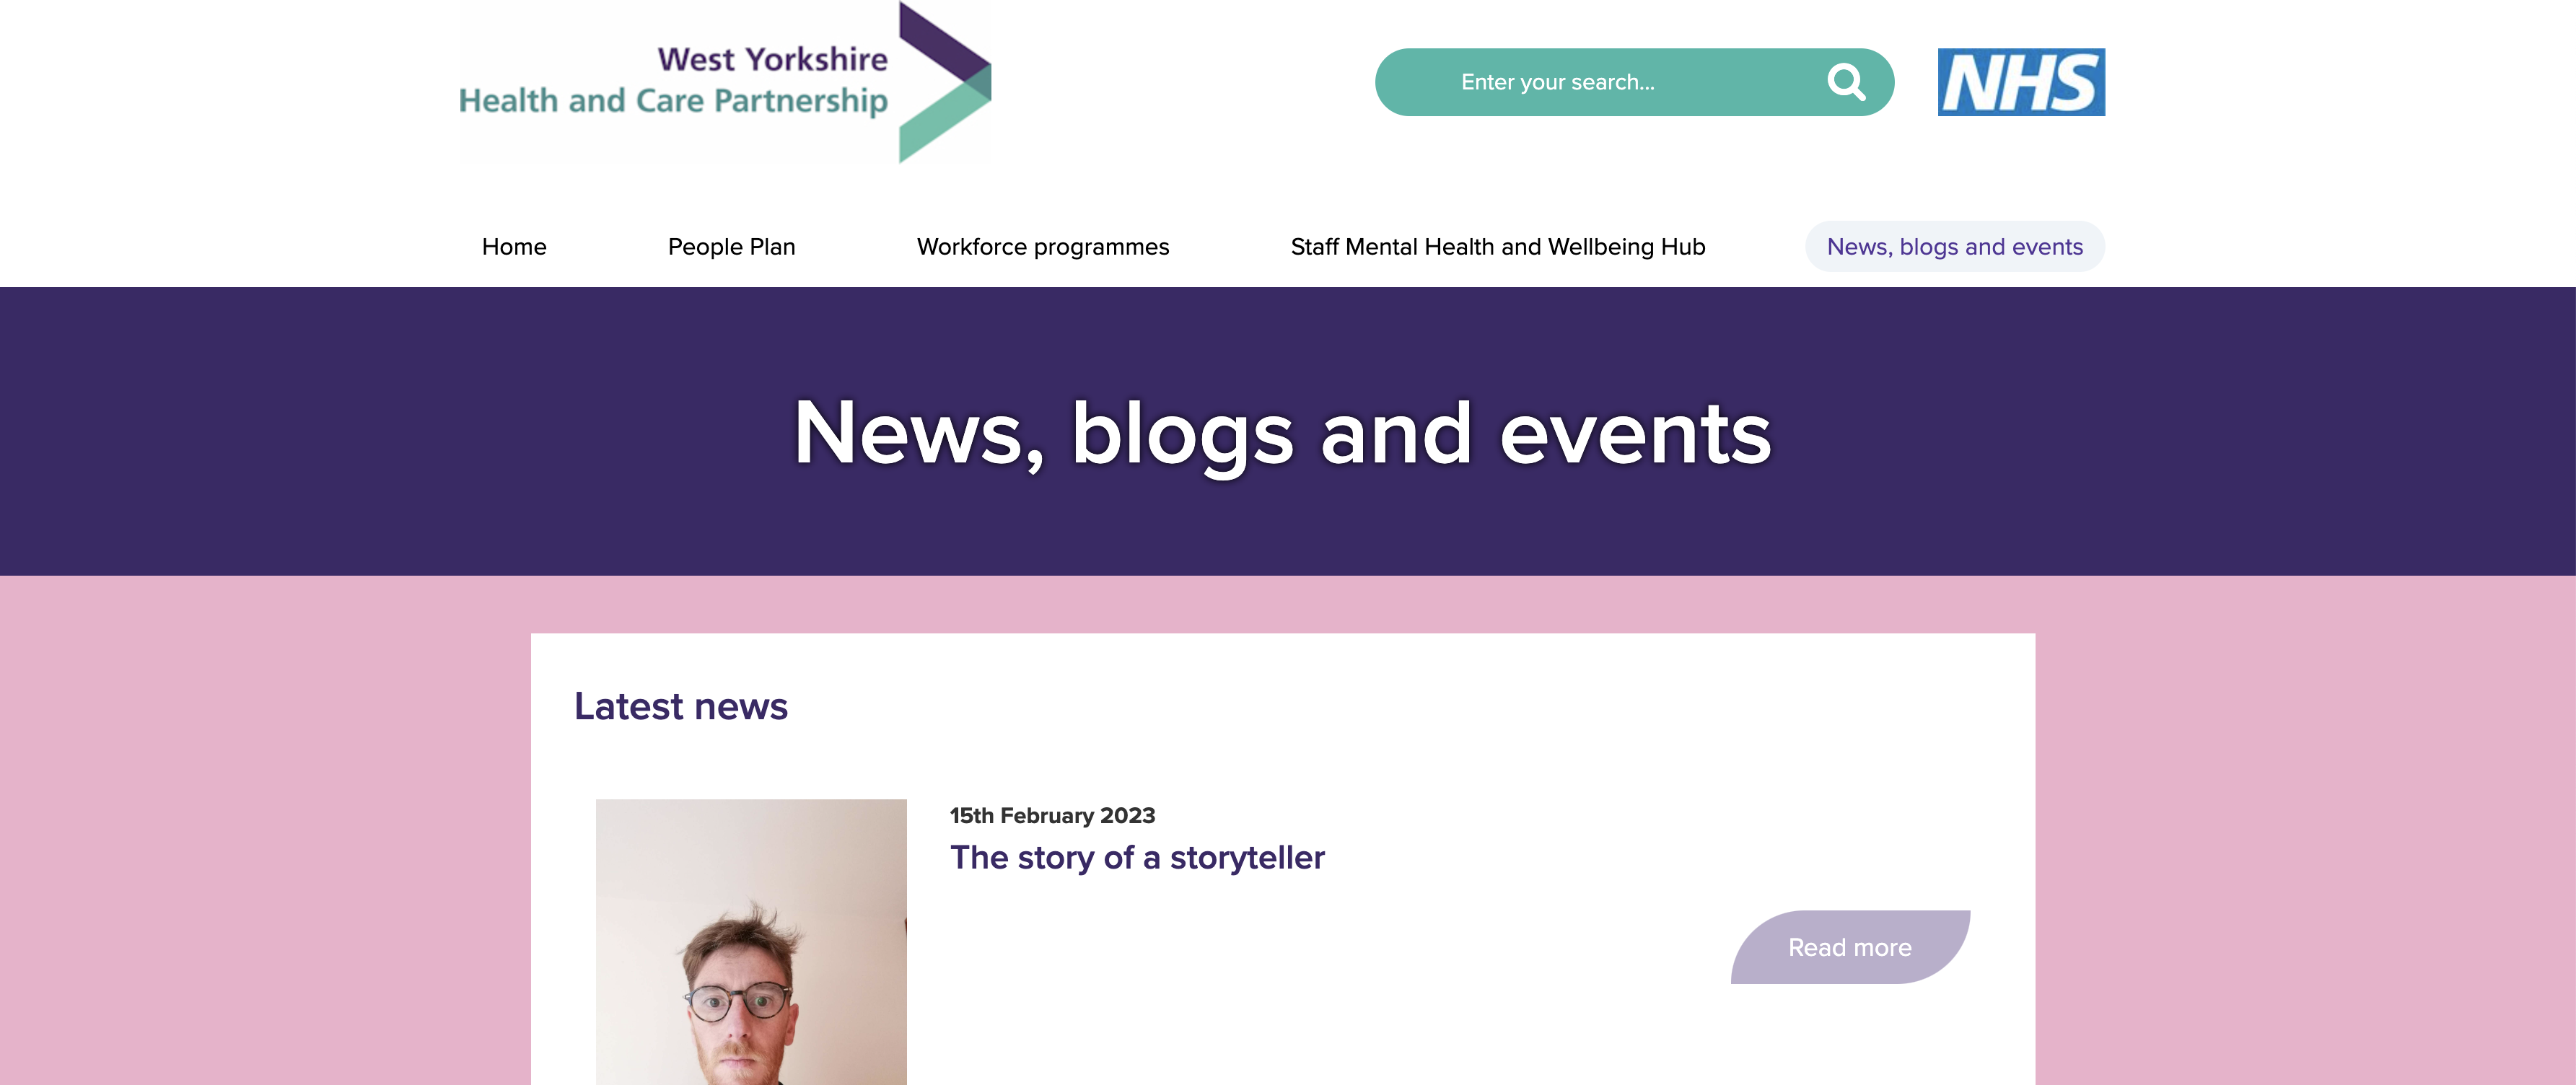 News, blogs and events:WY Partnership website